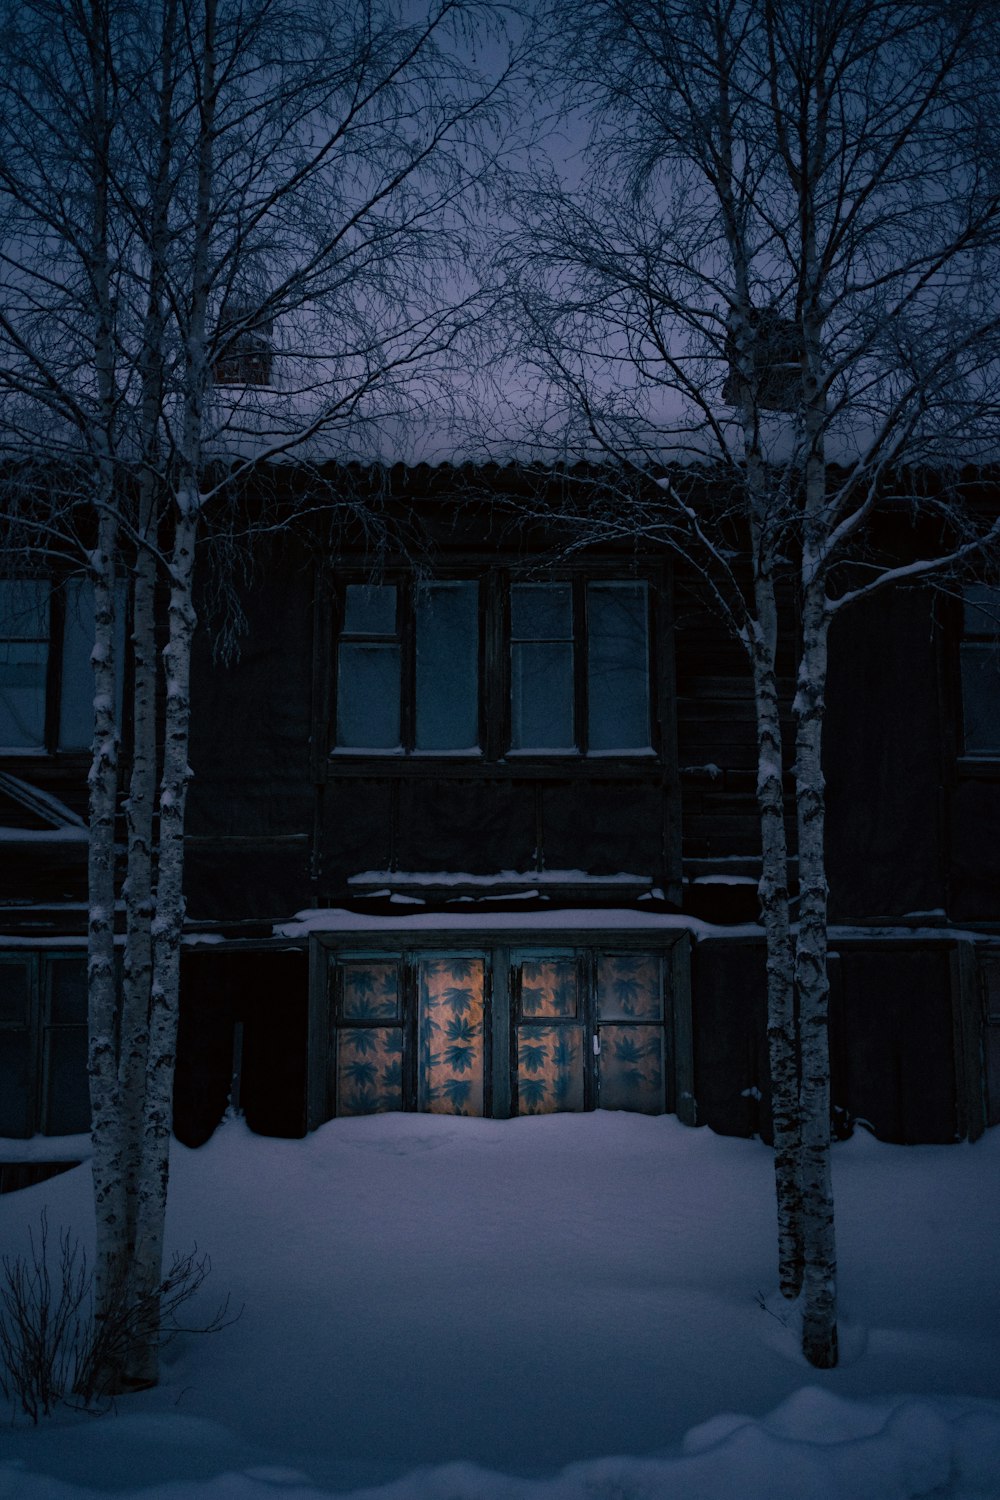 a house in the middle of a snowy forest